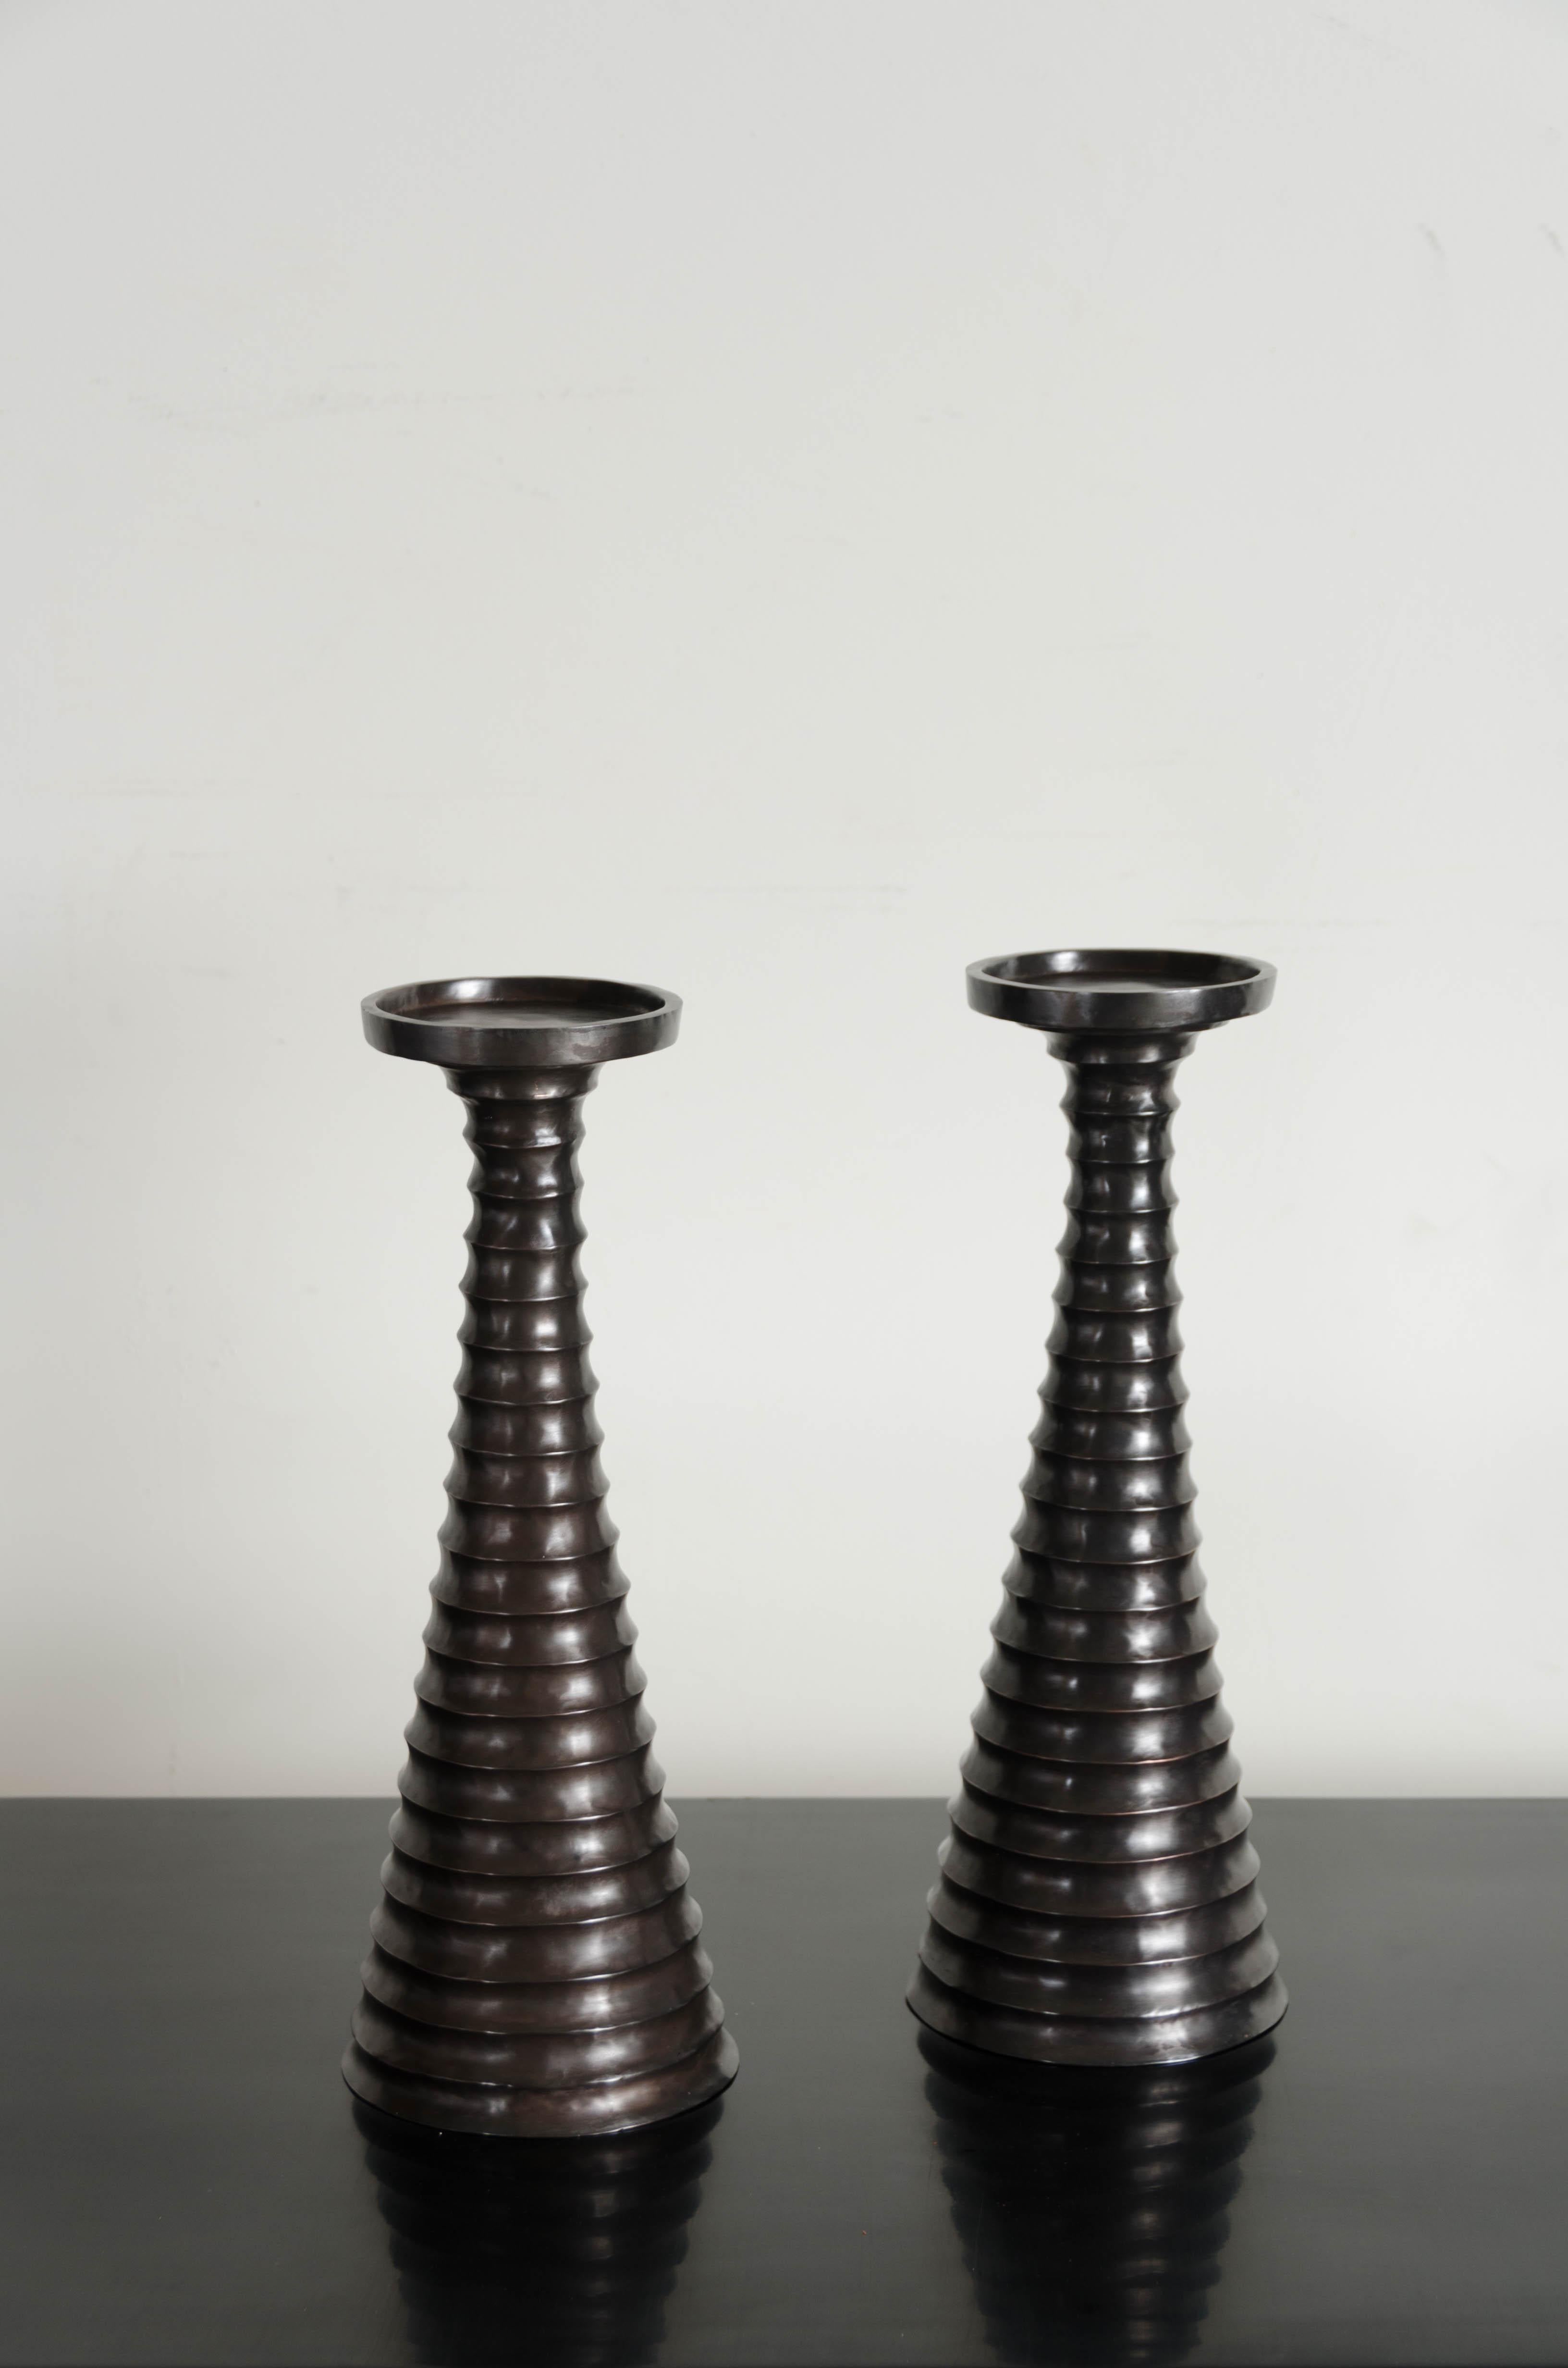 Tang candlestand
Black copper
Hand repoussé
Contemporary 
Limited edition
Each piece is individually crafted and is unique. 

Repoussé is the traditional art of hand-hammering decorative relief onto sheet metal. The technique originated